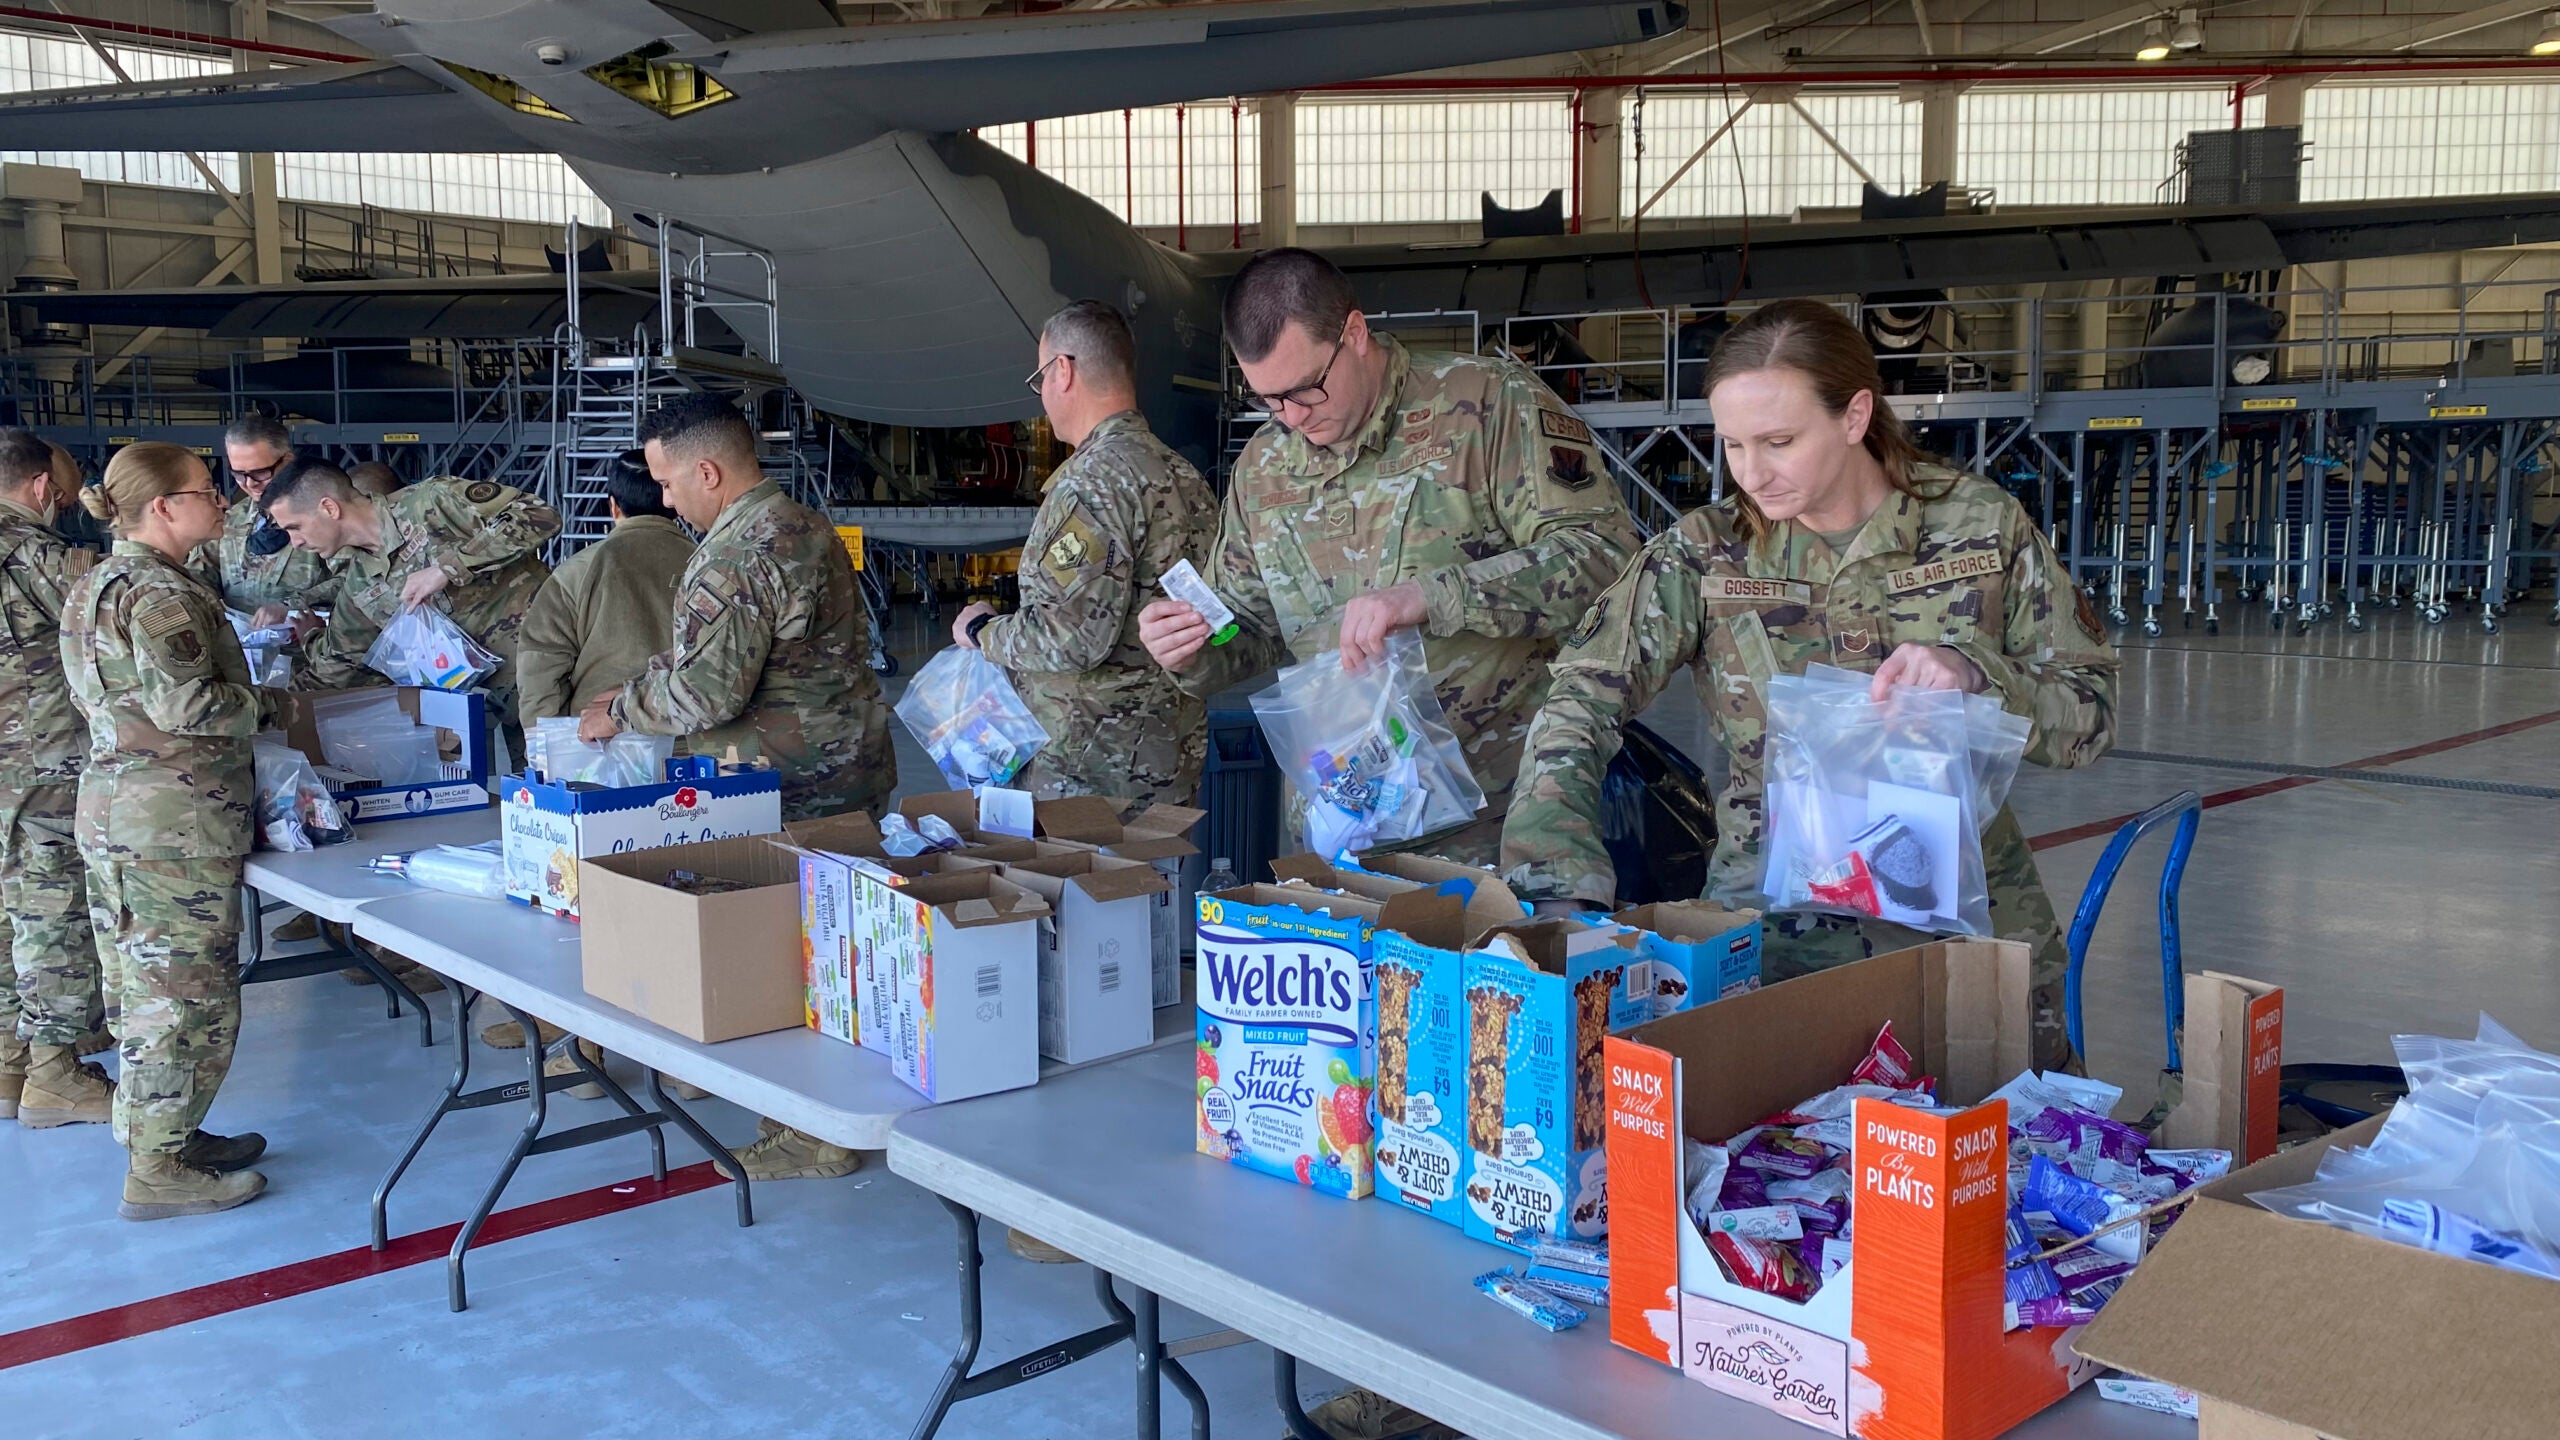 In support of Ukraine, our partner nation under the National Guard's State Partnership Program, Airmen from the 129th Rescue Wing came together to build care packages, March 8, 2022, at Moffett Air National Guard Base, California.  the packages will be sent overseas and given to Ukranian refugees displaced by the war with Russia.  The Airmen filled over 300 bags with socks, snacks and oral hygiene items that were donated by funds from the wing's Top 3 and Chief's Group for the humanitarian aid.  (U.S. Air National Guard photo by Master Sgt. Ray Aquino)